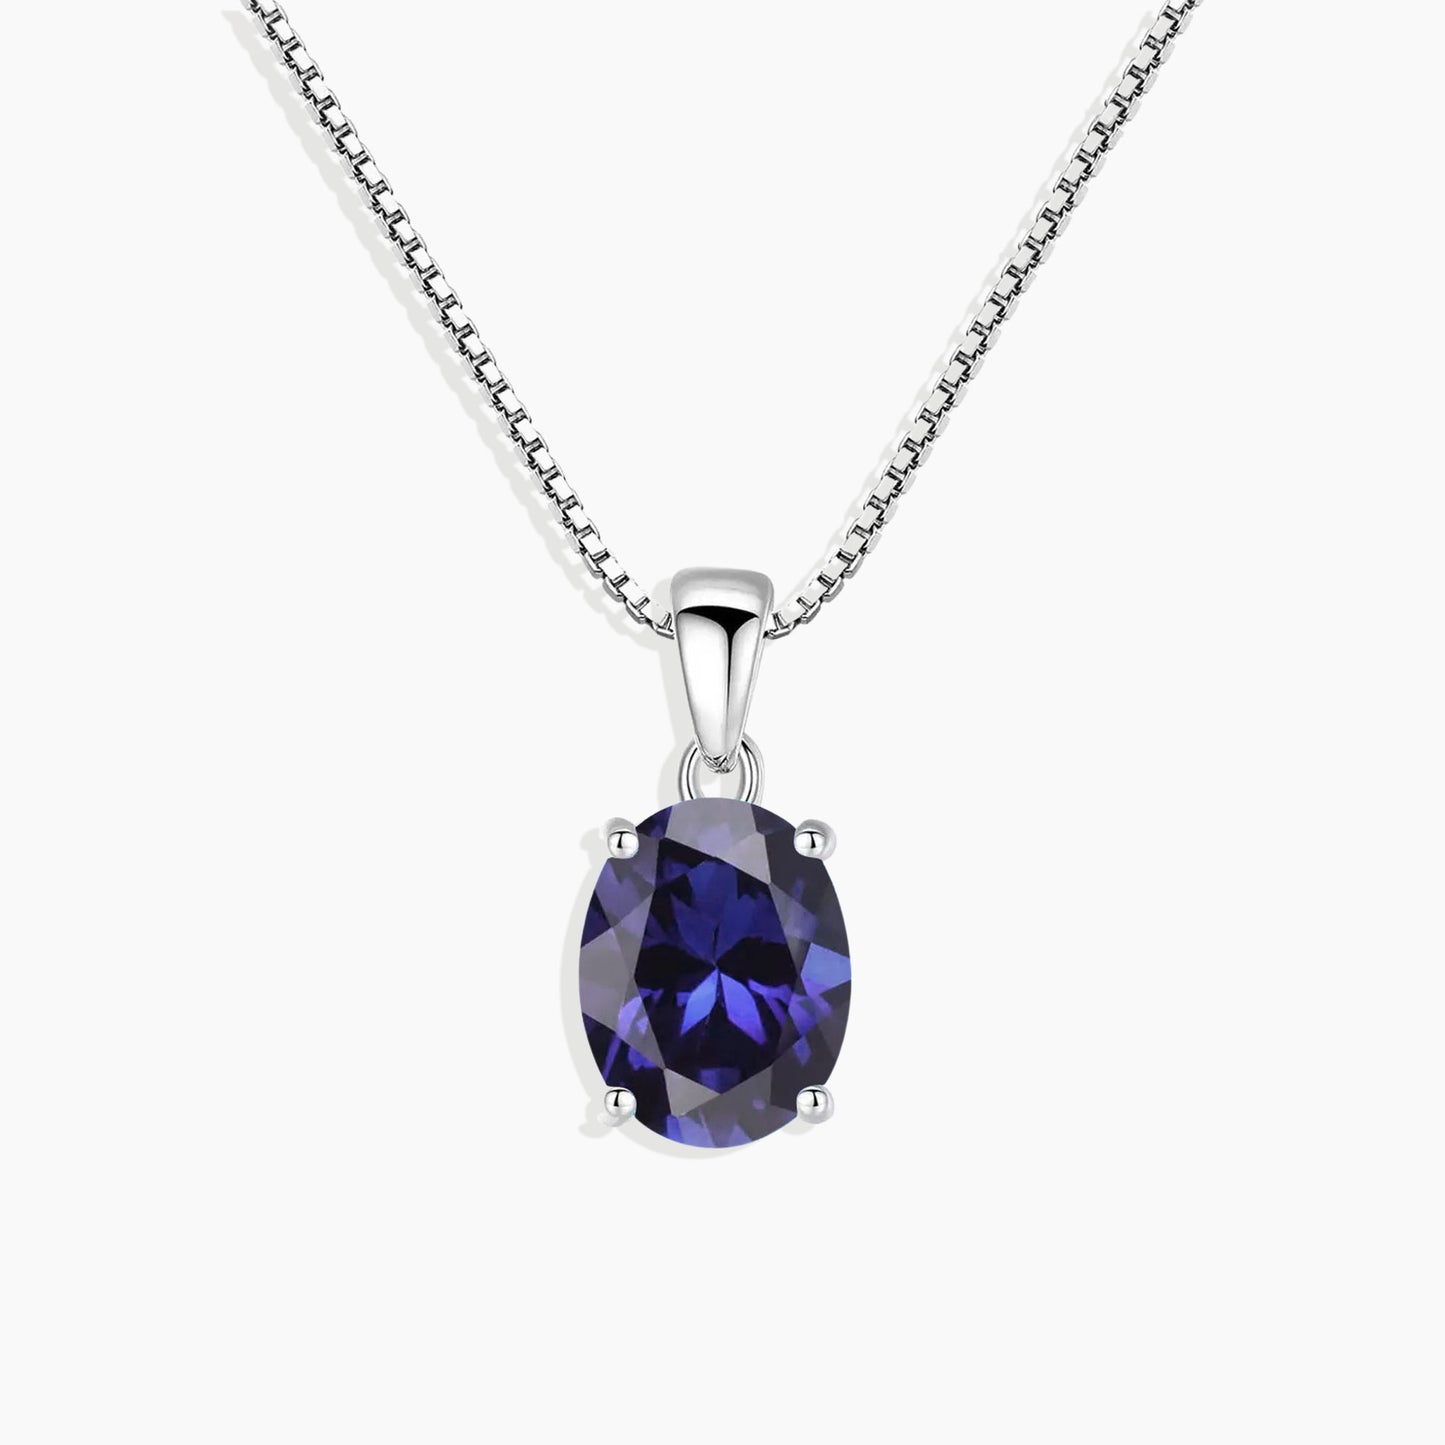 Irosk Oval Cut Necklace in Sterling Silver -  Tanzanite